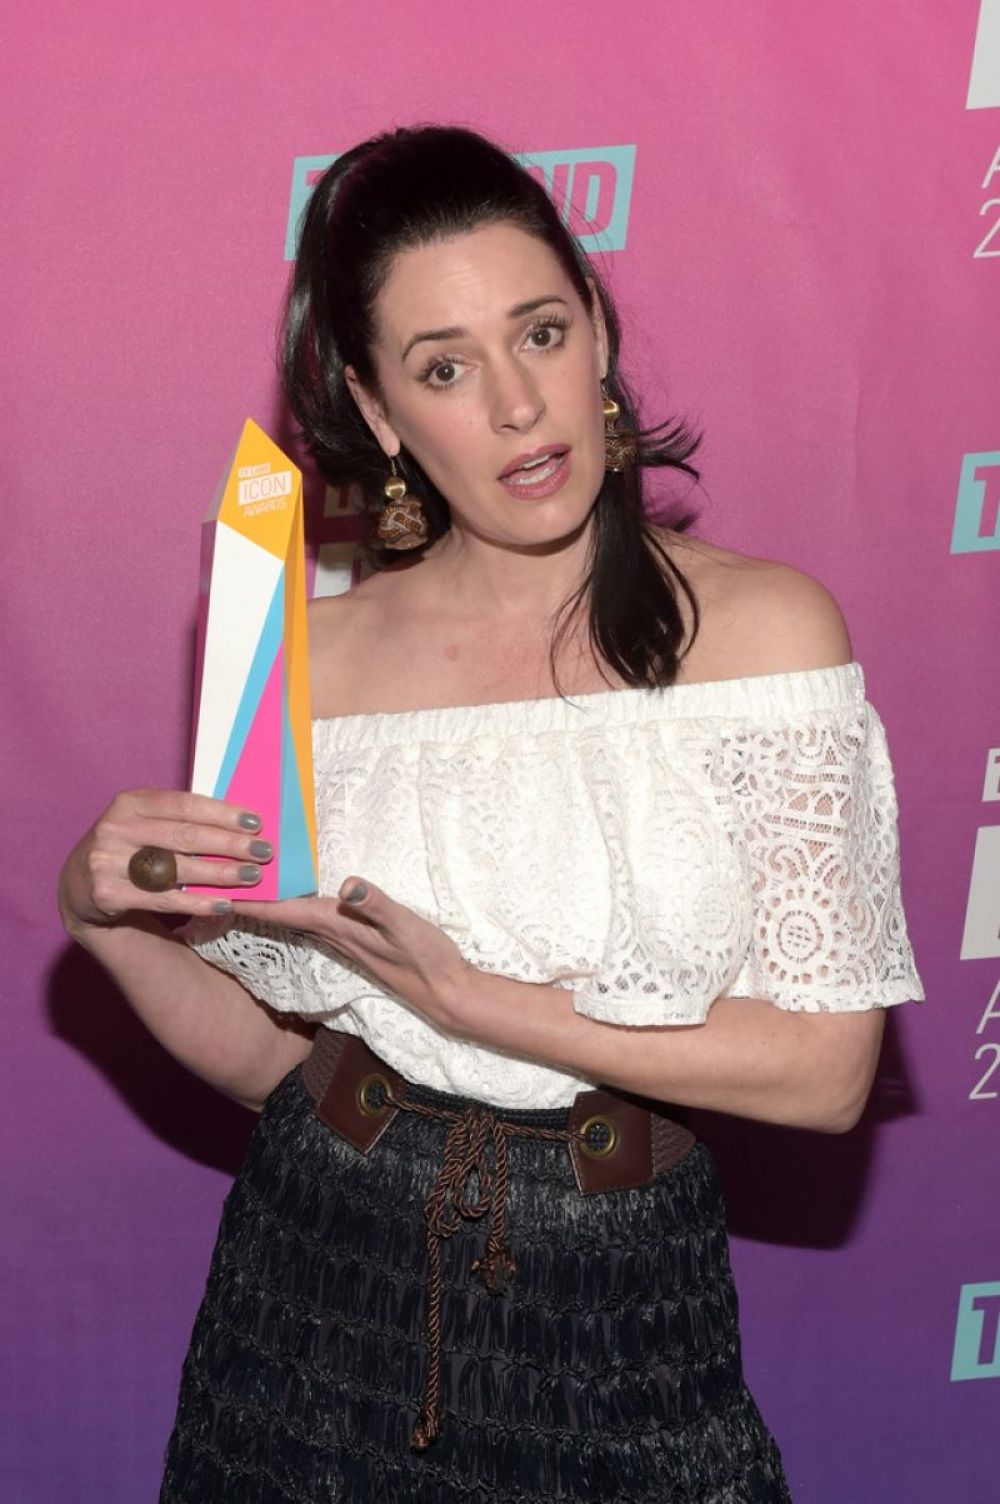 PAGET BREWSTER At TV Land Icon Awards In Santa Monica 04 10 2016